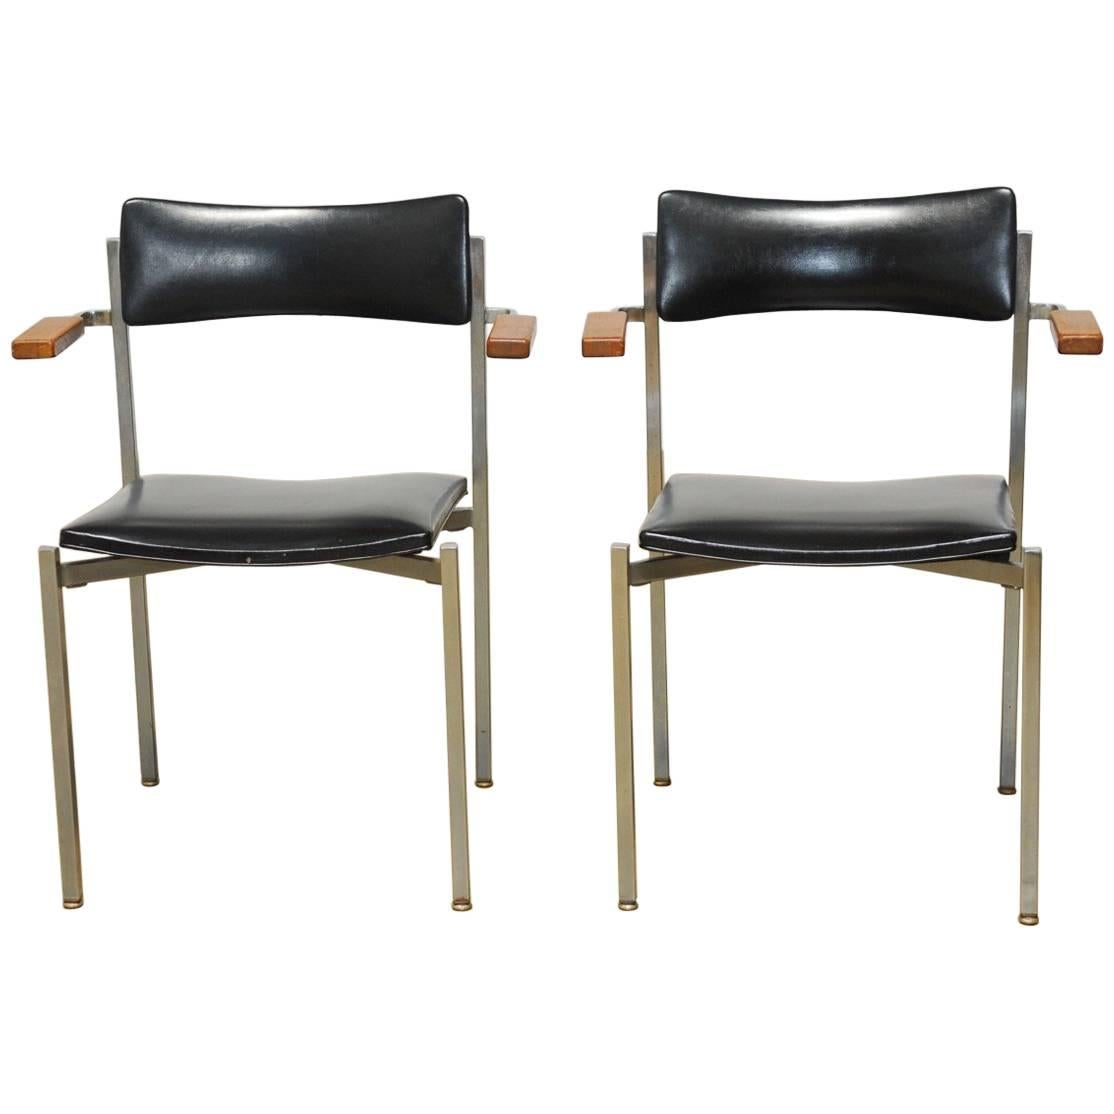 Pair of Mid-Century Steel Armchairs by Frederic Weinberg